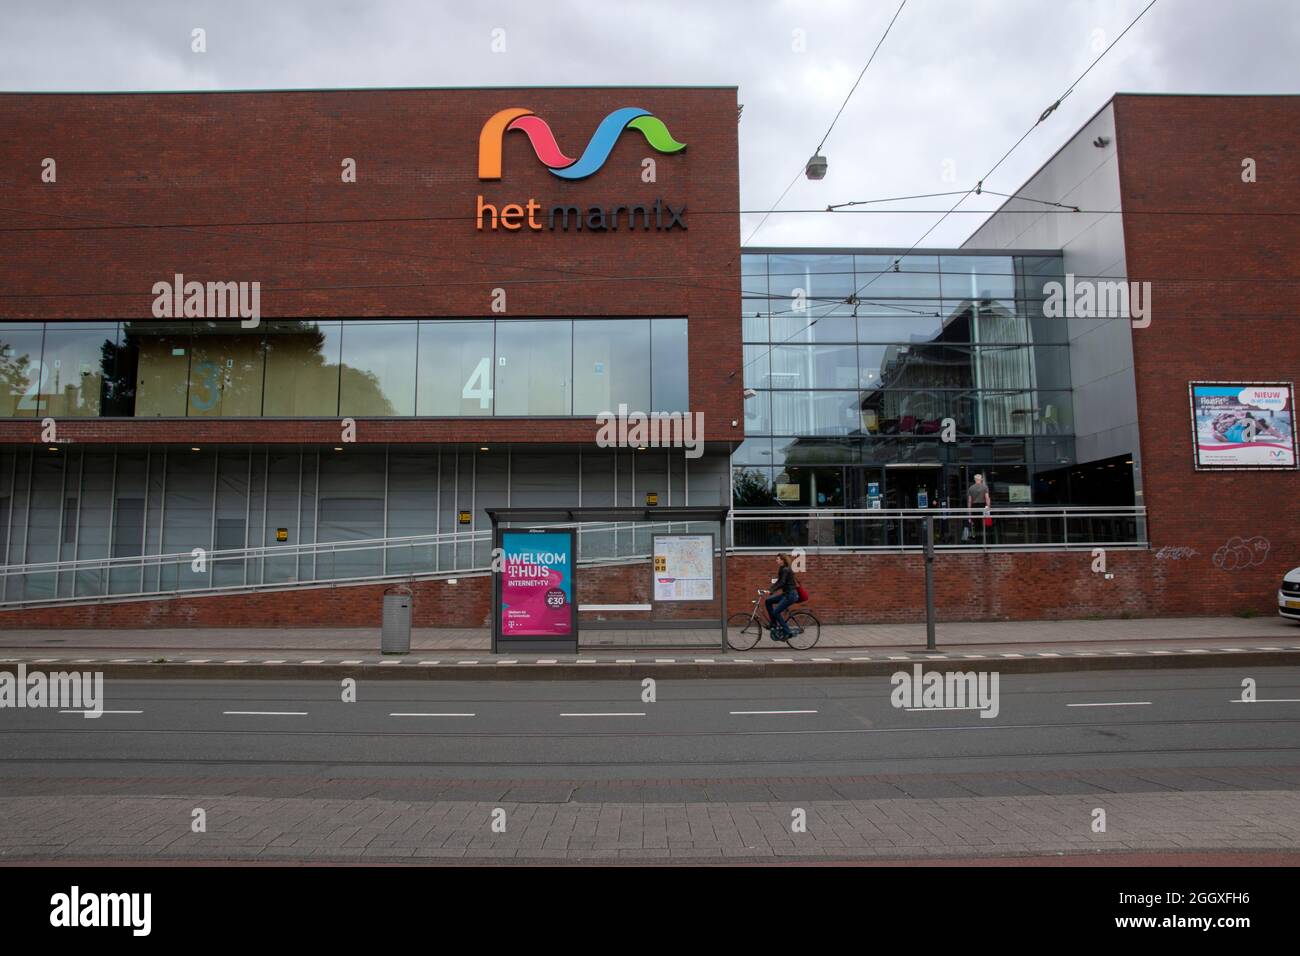 Het Marnix Swimming Pool Building At Amsterdam The Netherlands 2-9-2021  Stock Photo - Alamy